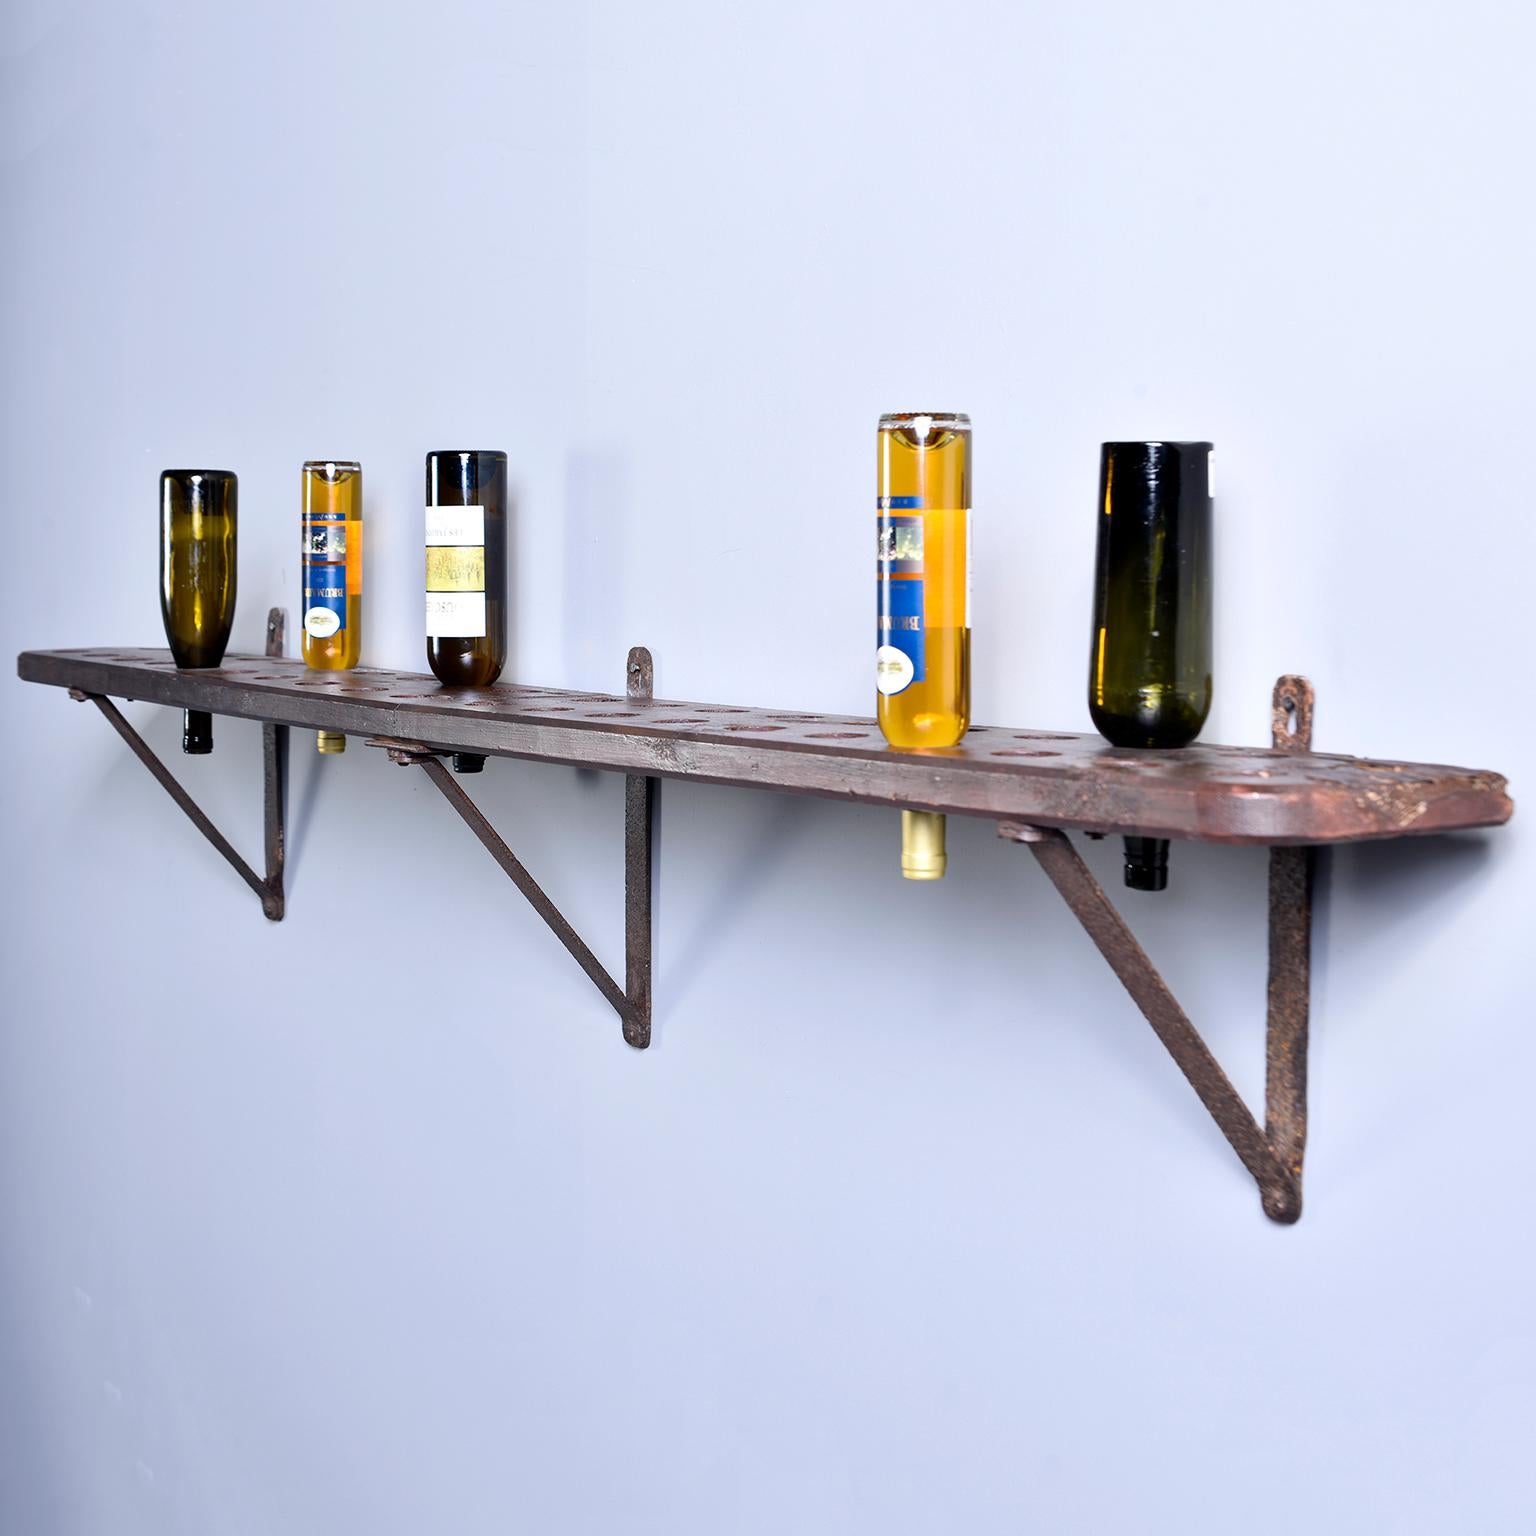 20th Century Rustic Wood and Iron French Shelf-Style Wine Rack